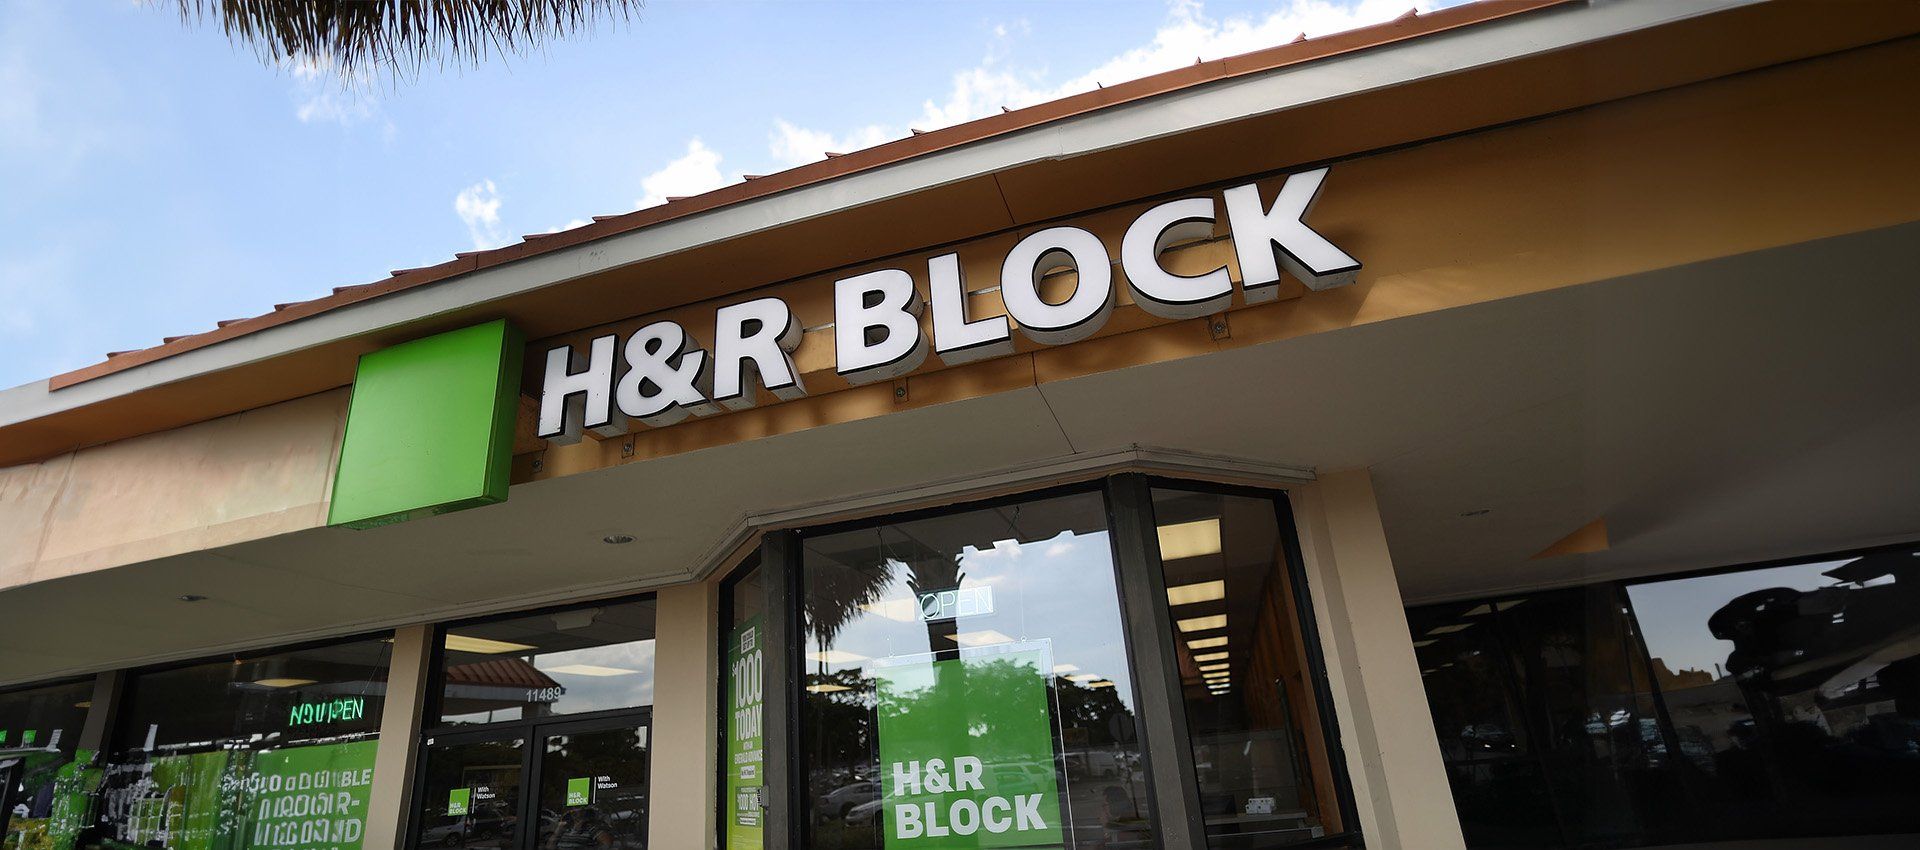 h and r block office building with signage, exterior